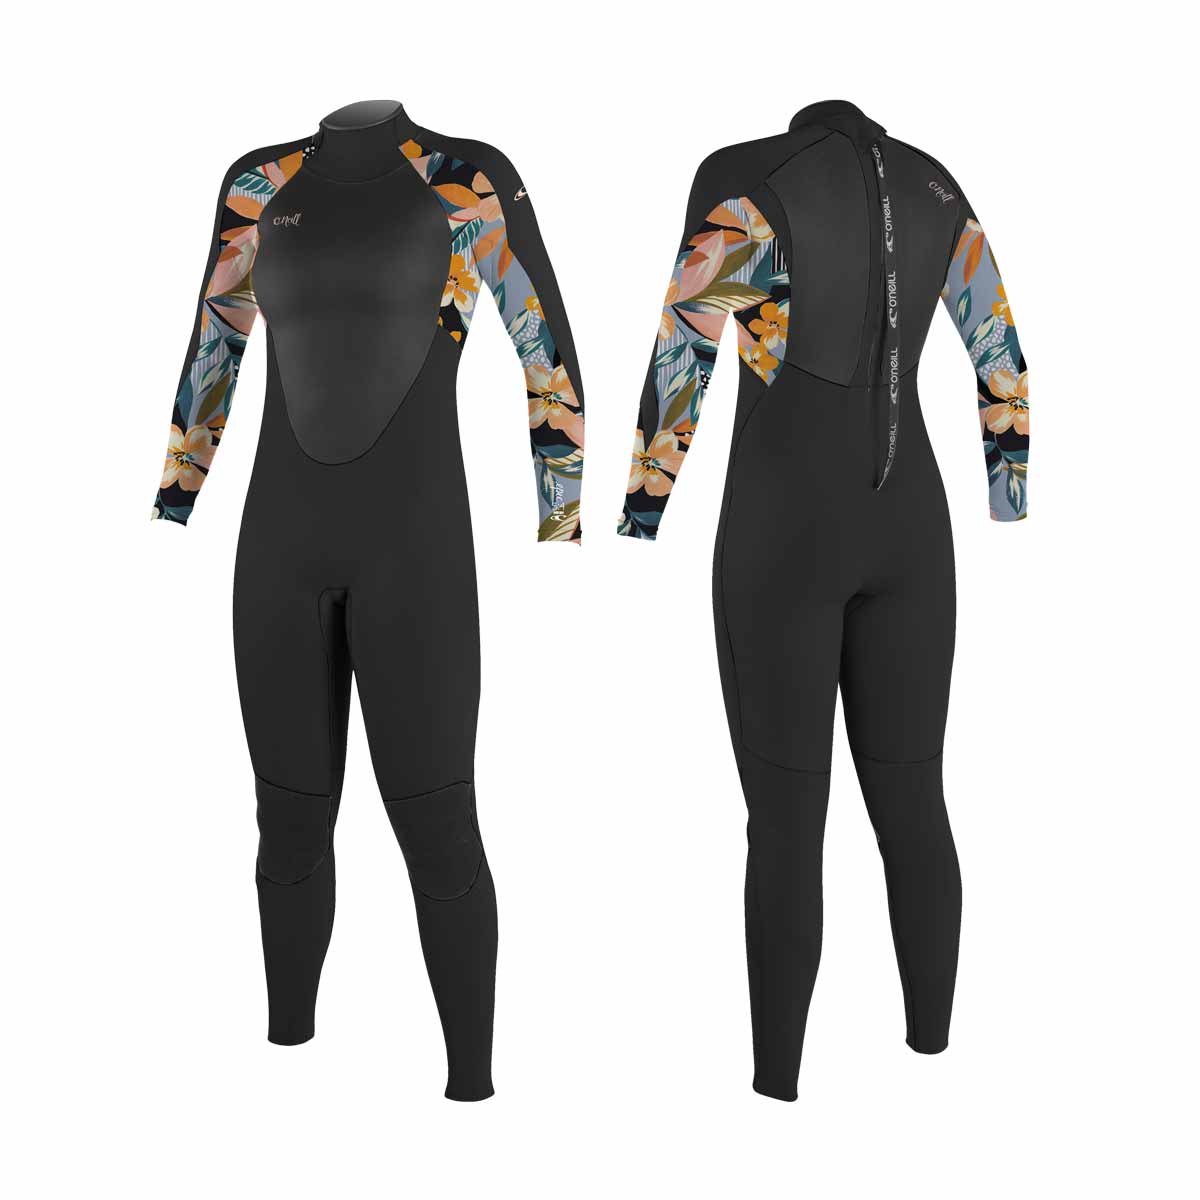 O'Neill Wms Epic 4/3 Back Zip Full Wetsuit – Demi Floral HW5